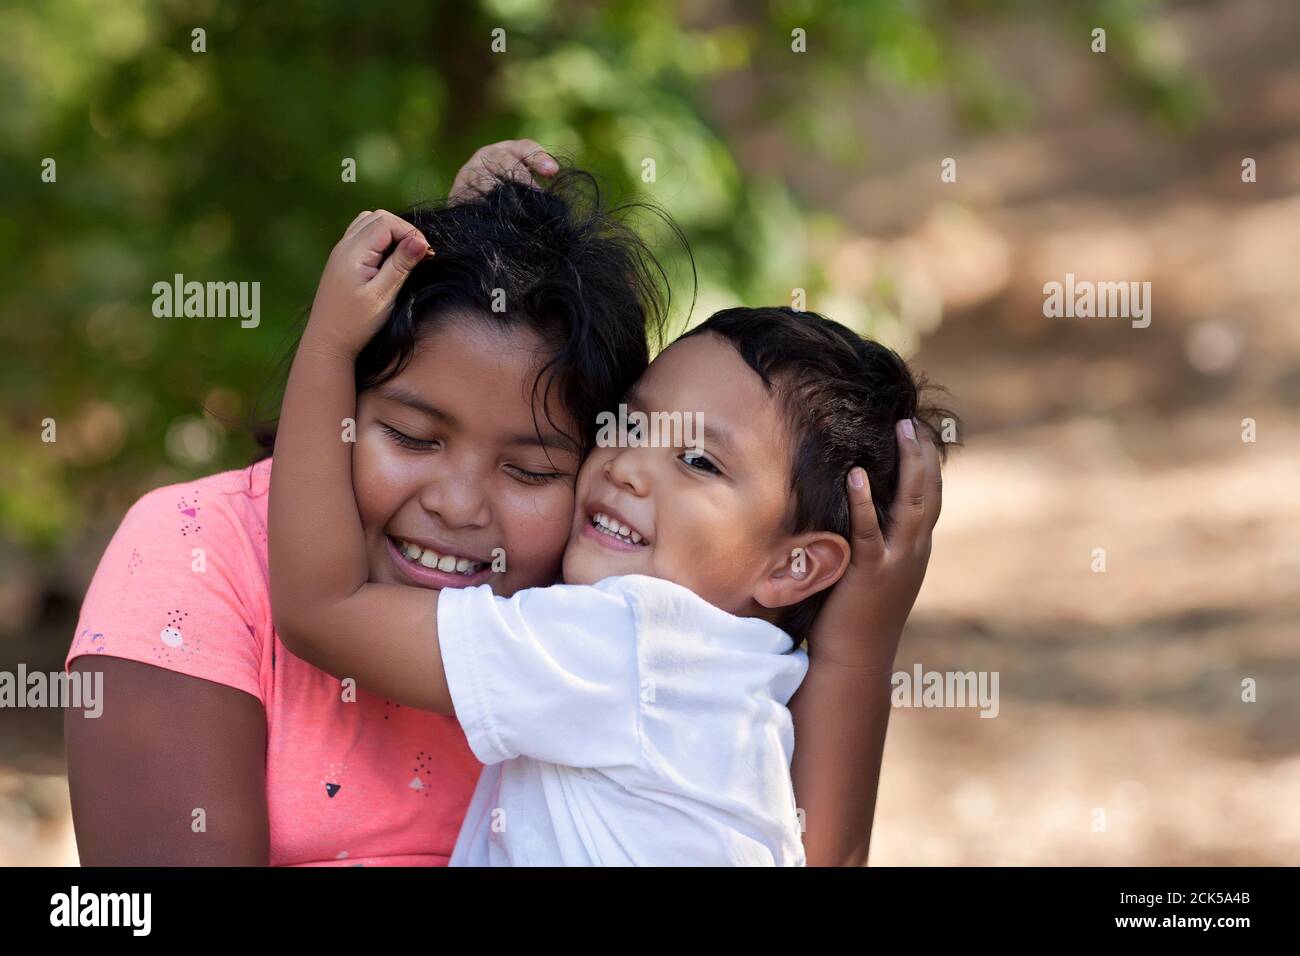 Little brother is hugging his older sister with his arms around her face and both are smiling in outdoor setting. Stock Photo